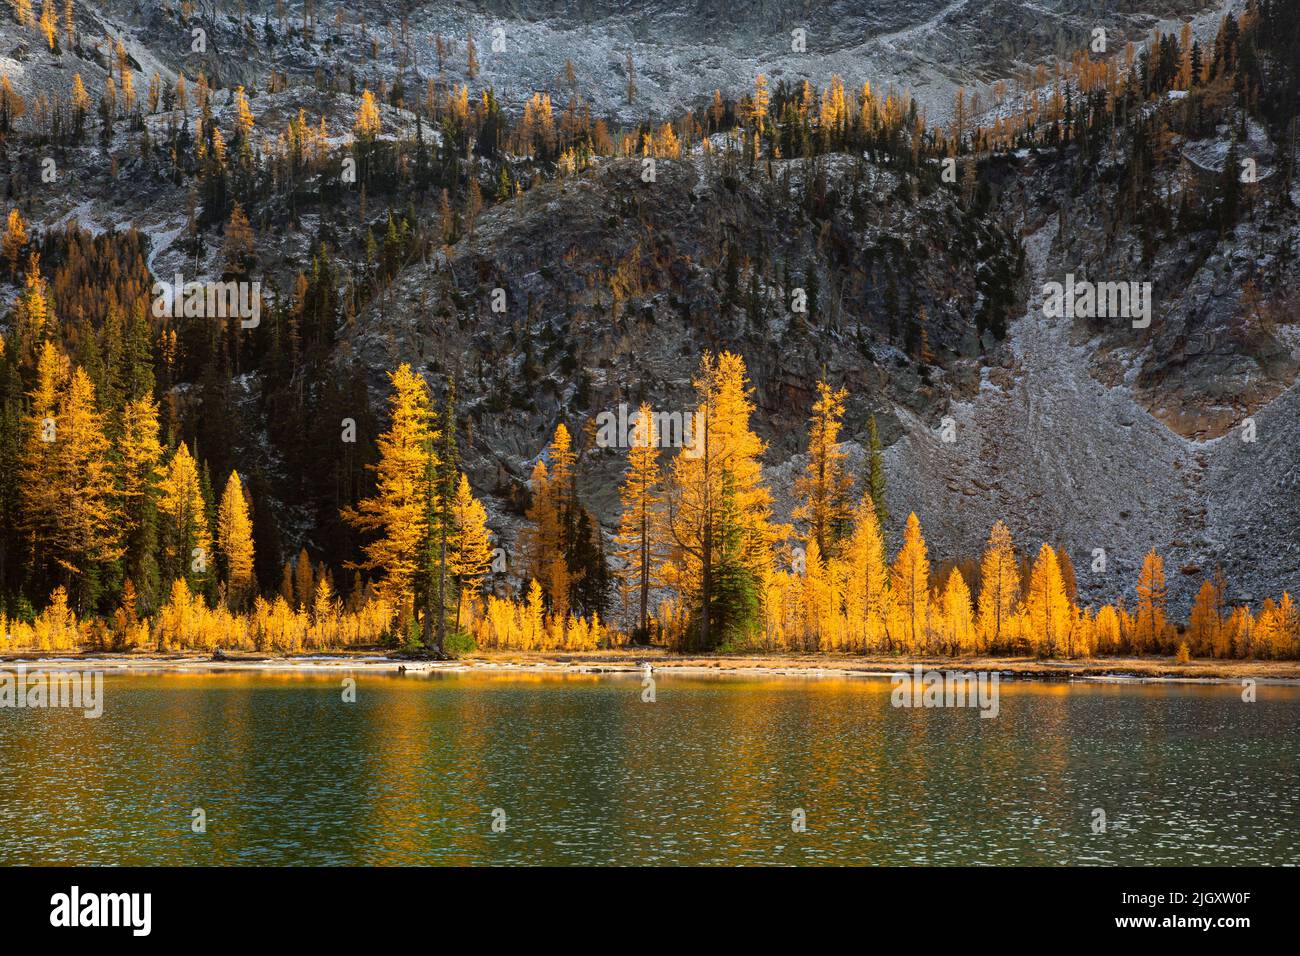 WA21735-00...WASHINGTON - Fall colored alpine larch trees reflecting in the riffled waters of Larch Lake in the Glacier Peak Wilderness area. Stock Photo